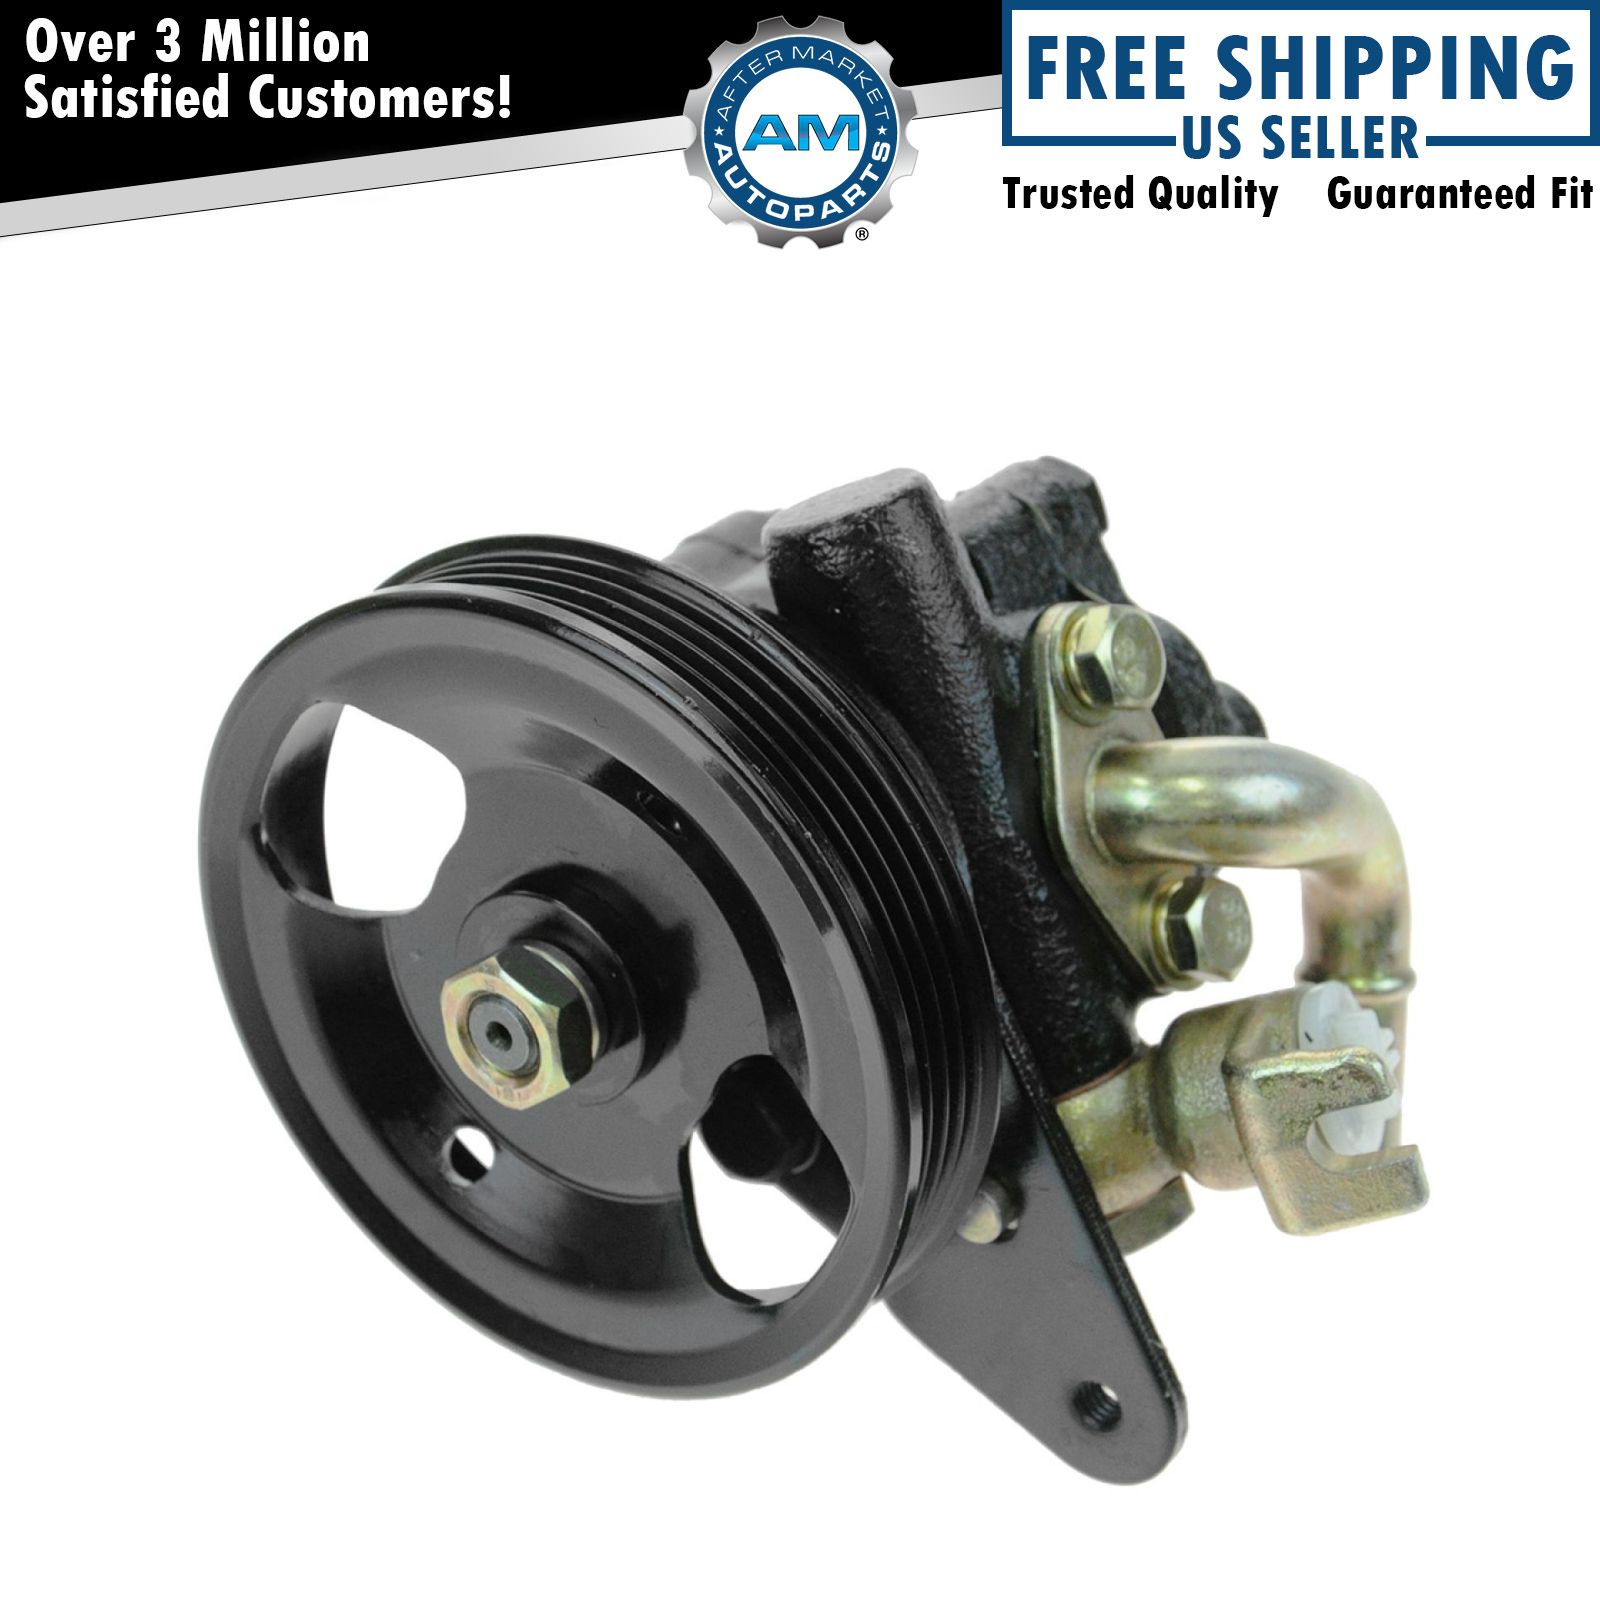 Power Steering Pump with Pulley for Nissan Maxima Infiniti I30 I35